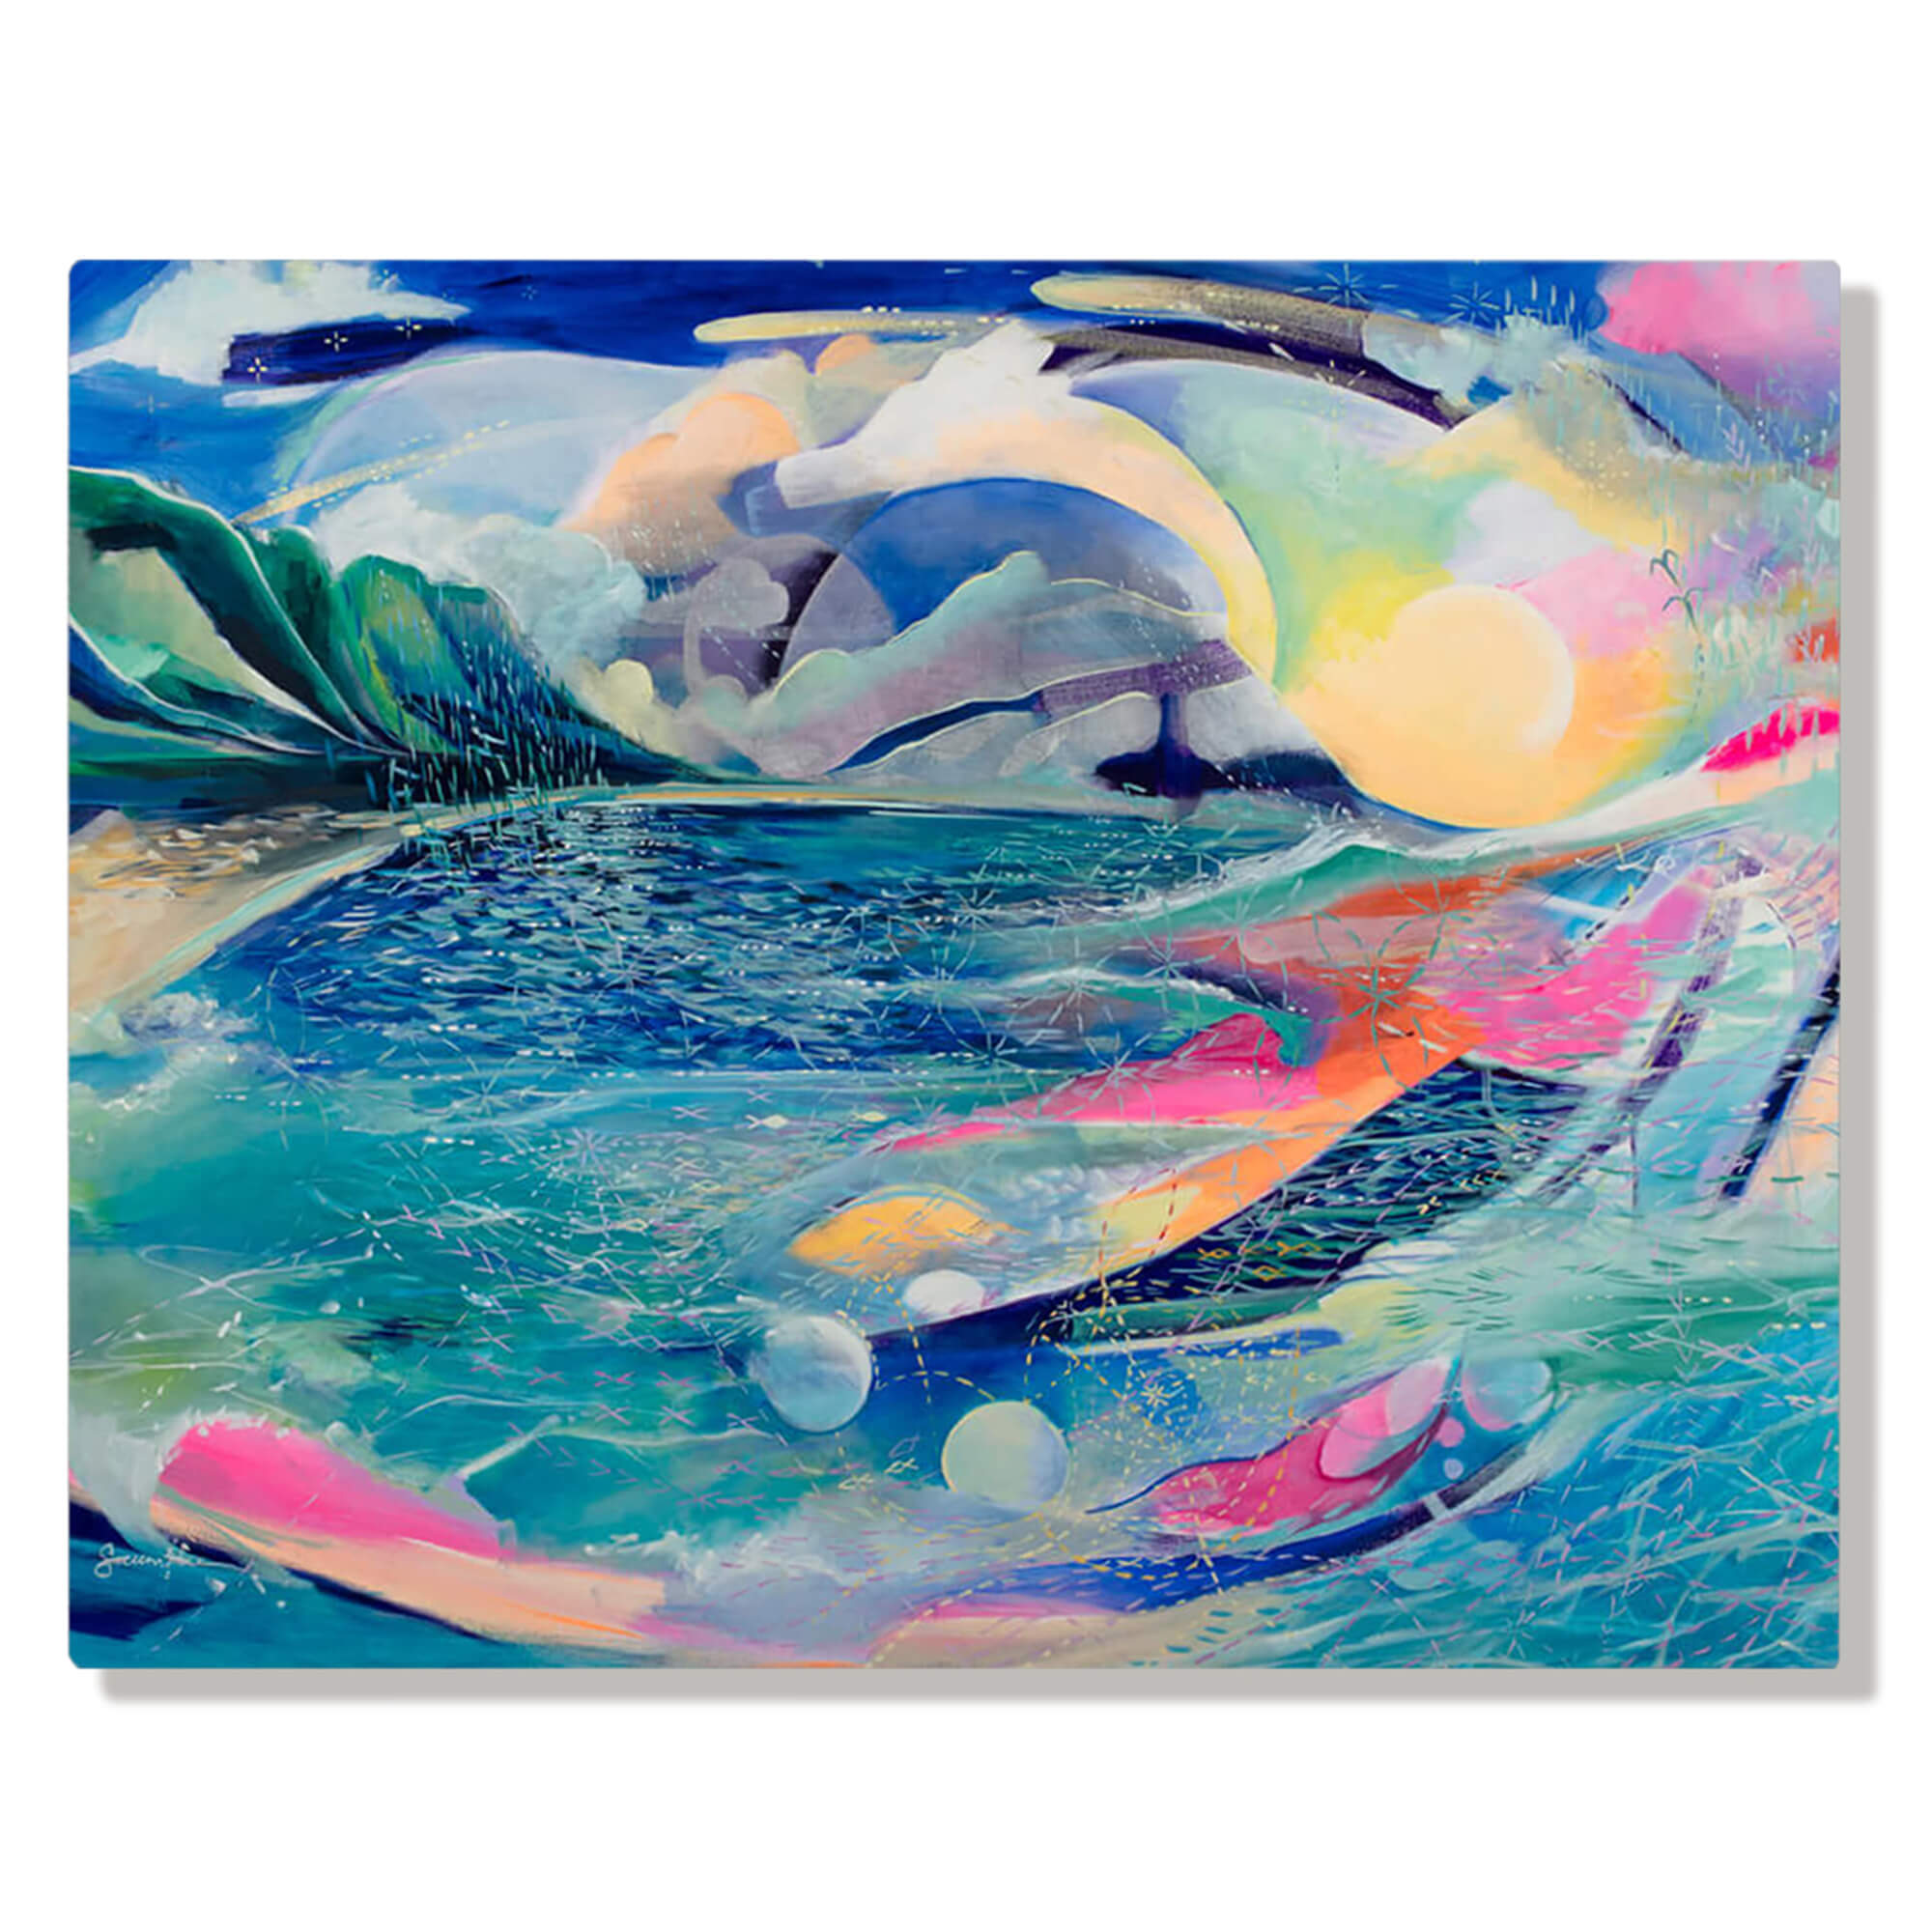 A metal art print of an abstract artwork of a seascape with vibrant pastel colors Hawaii artist Saumolia Puapuaga